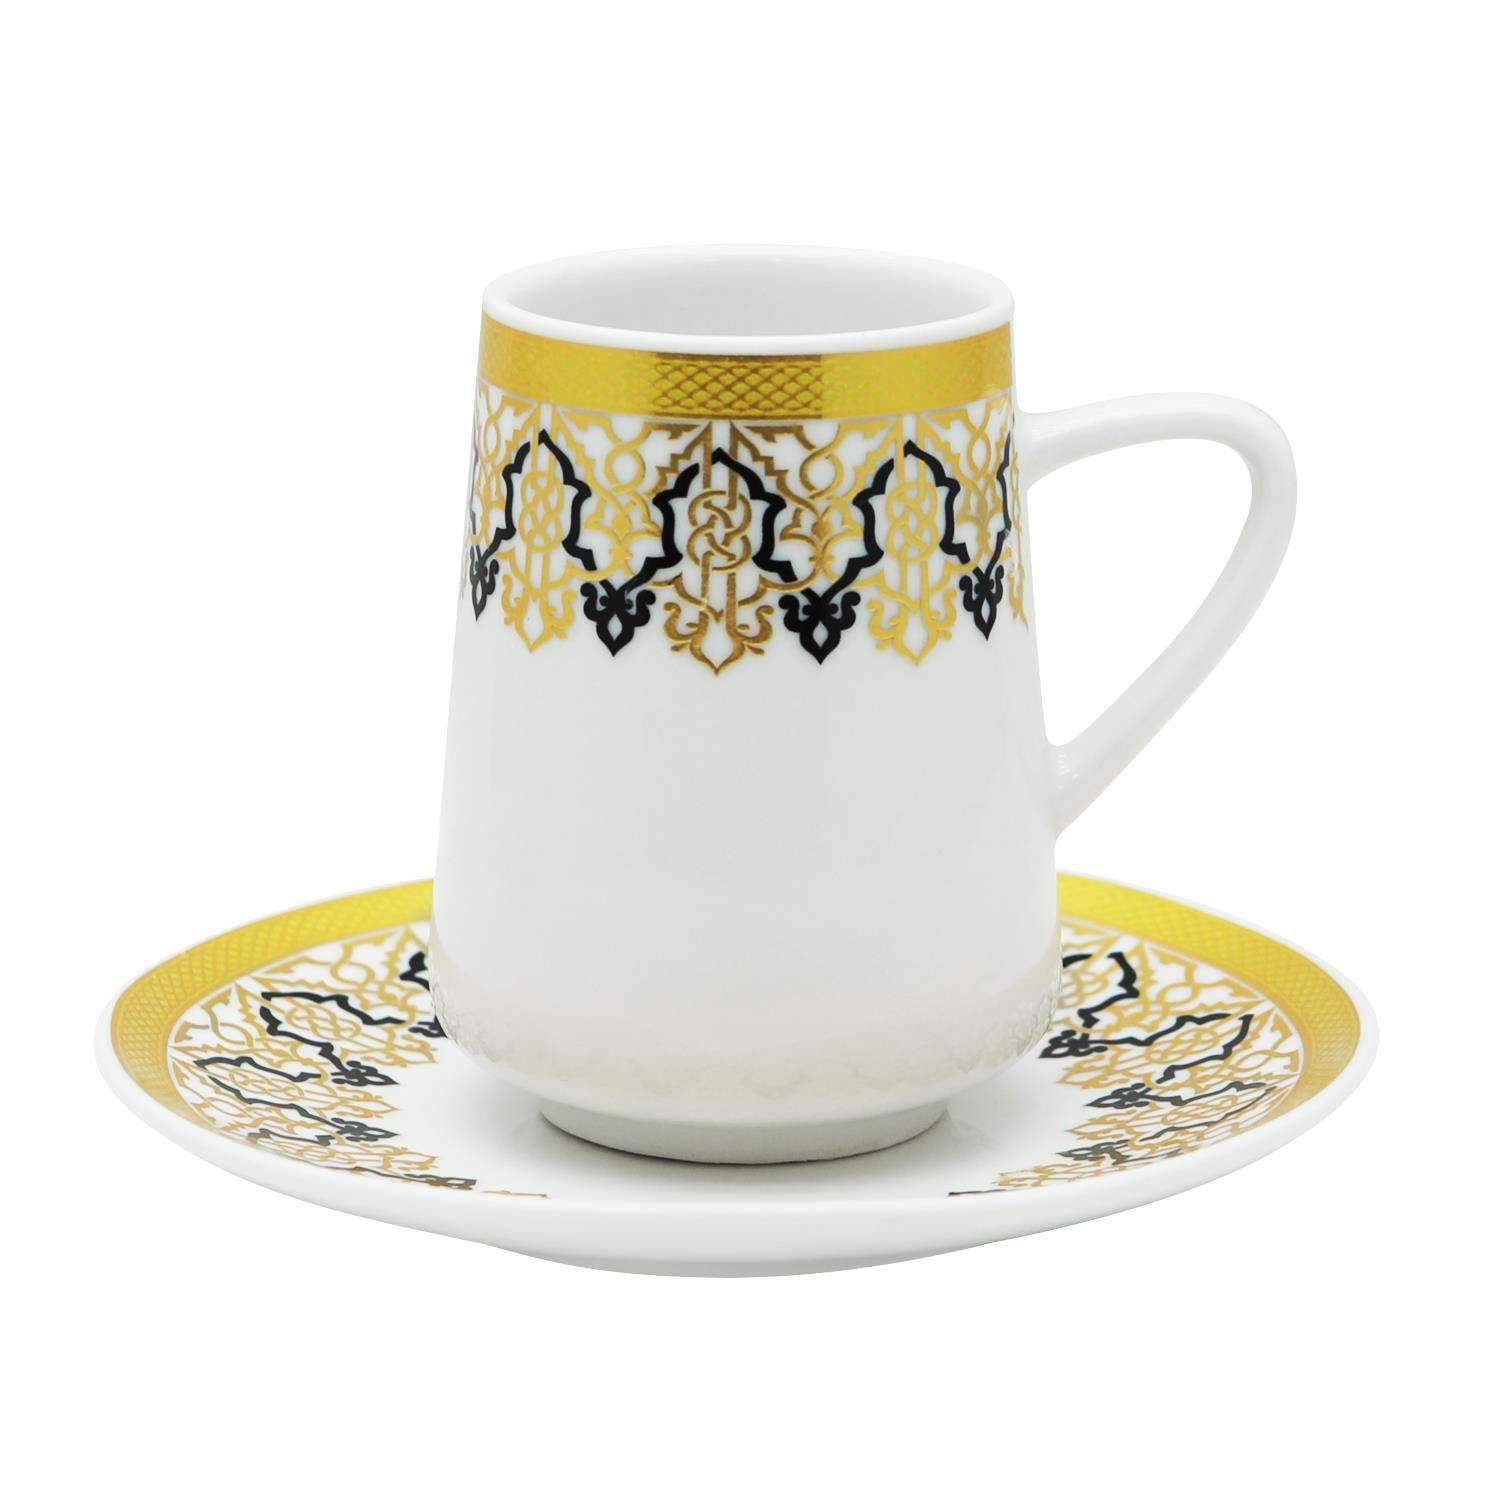 Pearl Ceramic Cawa Cup And Saucer - Black